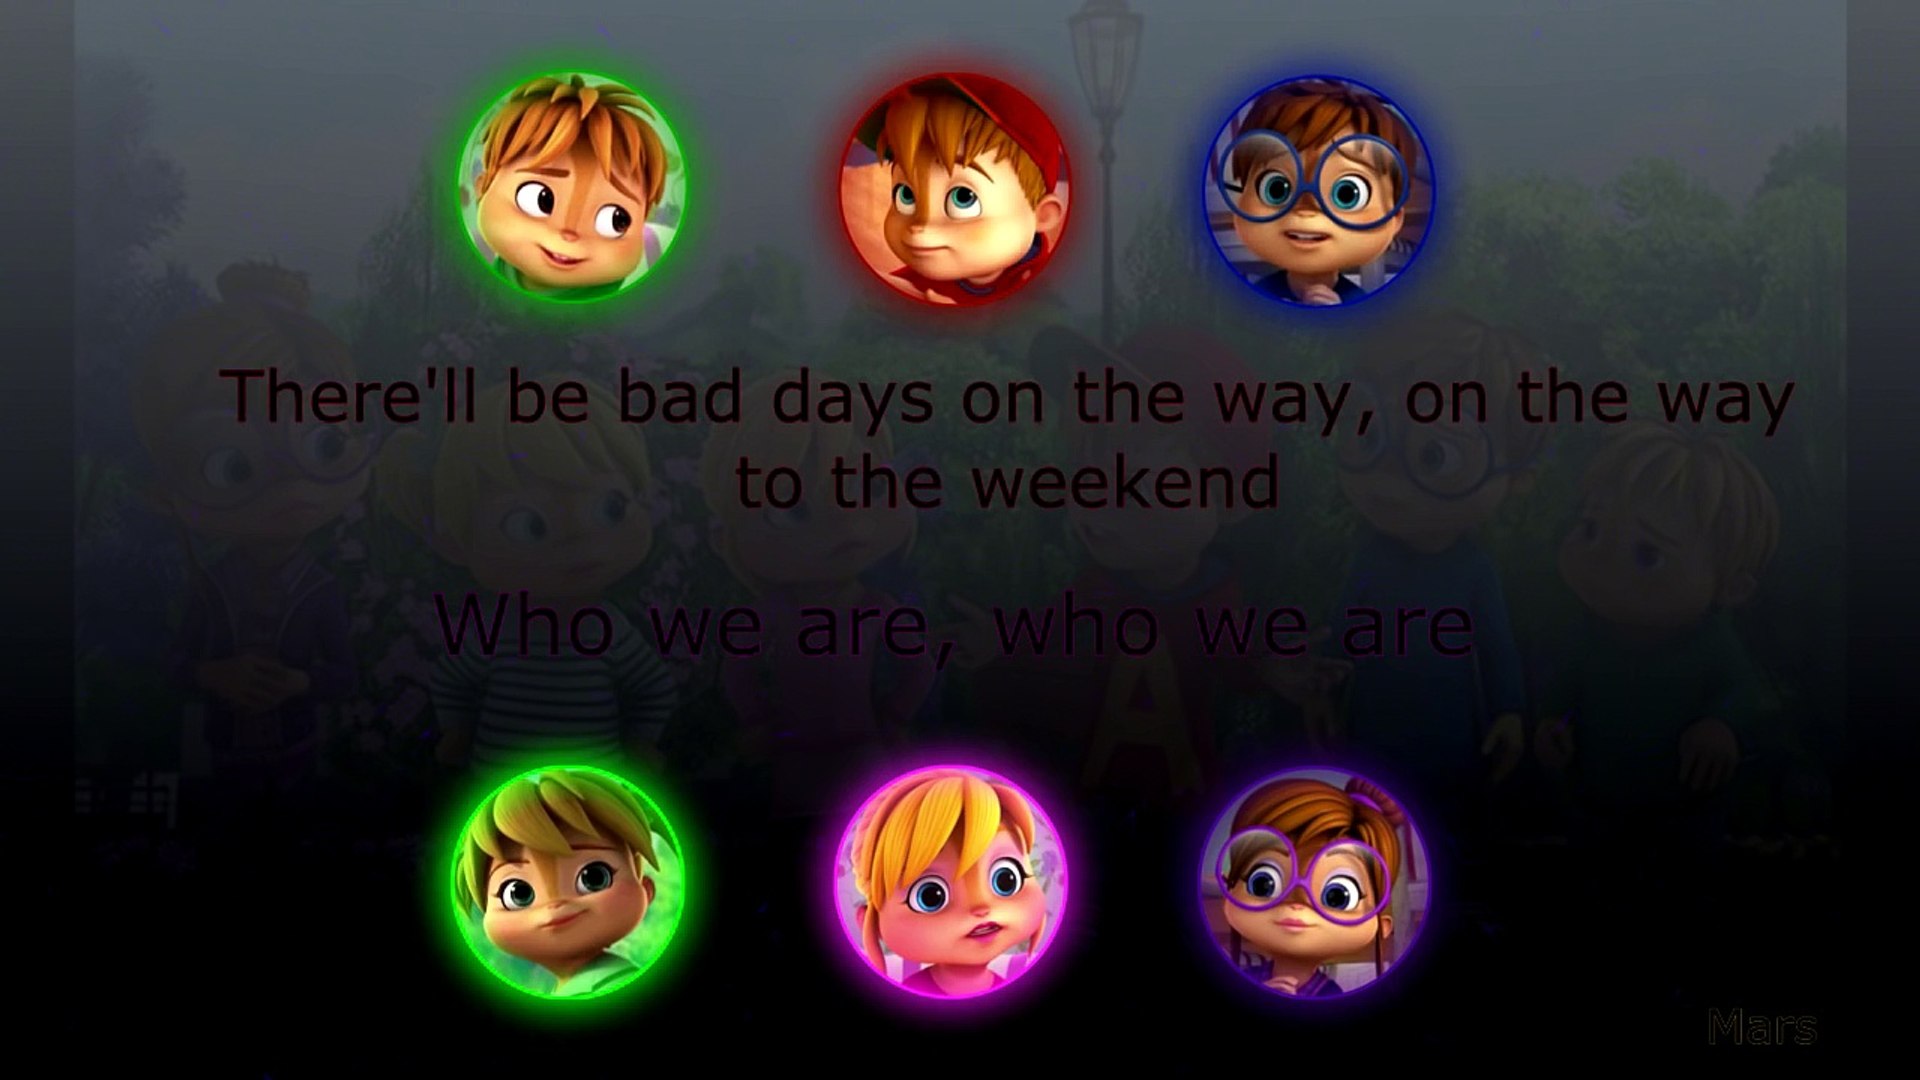 The Chipmunks & The Chipettes - Survivor (with lyrics) - video Dailymotion